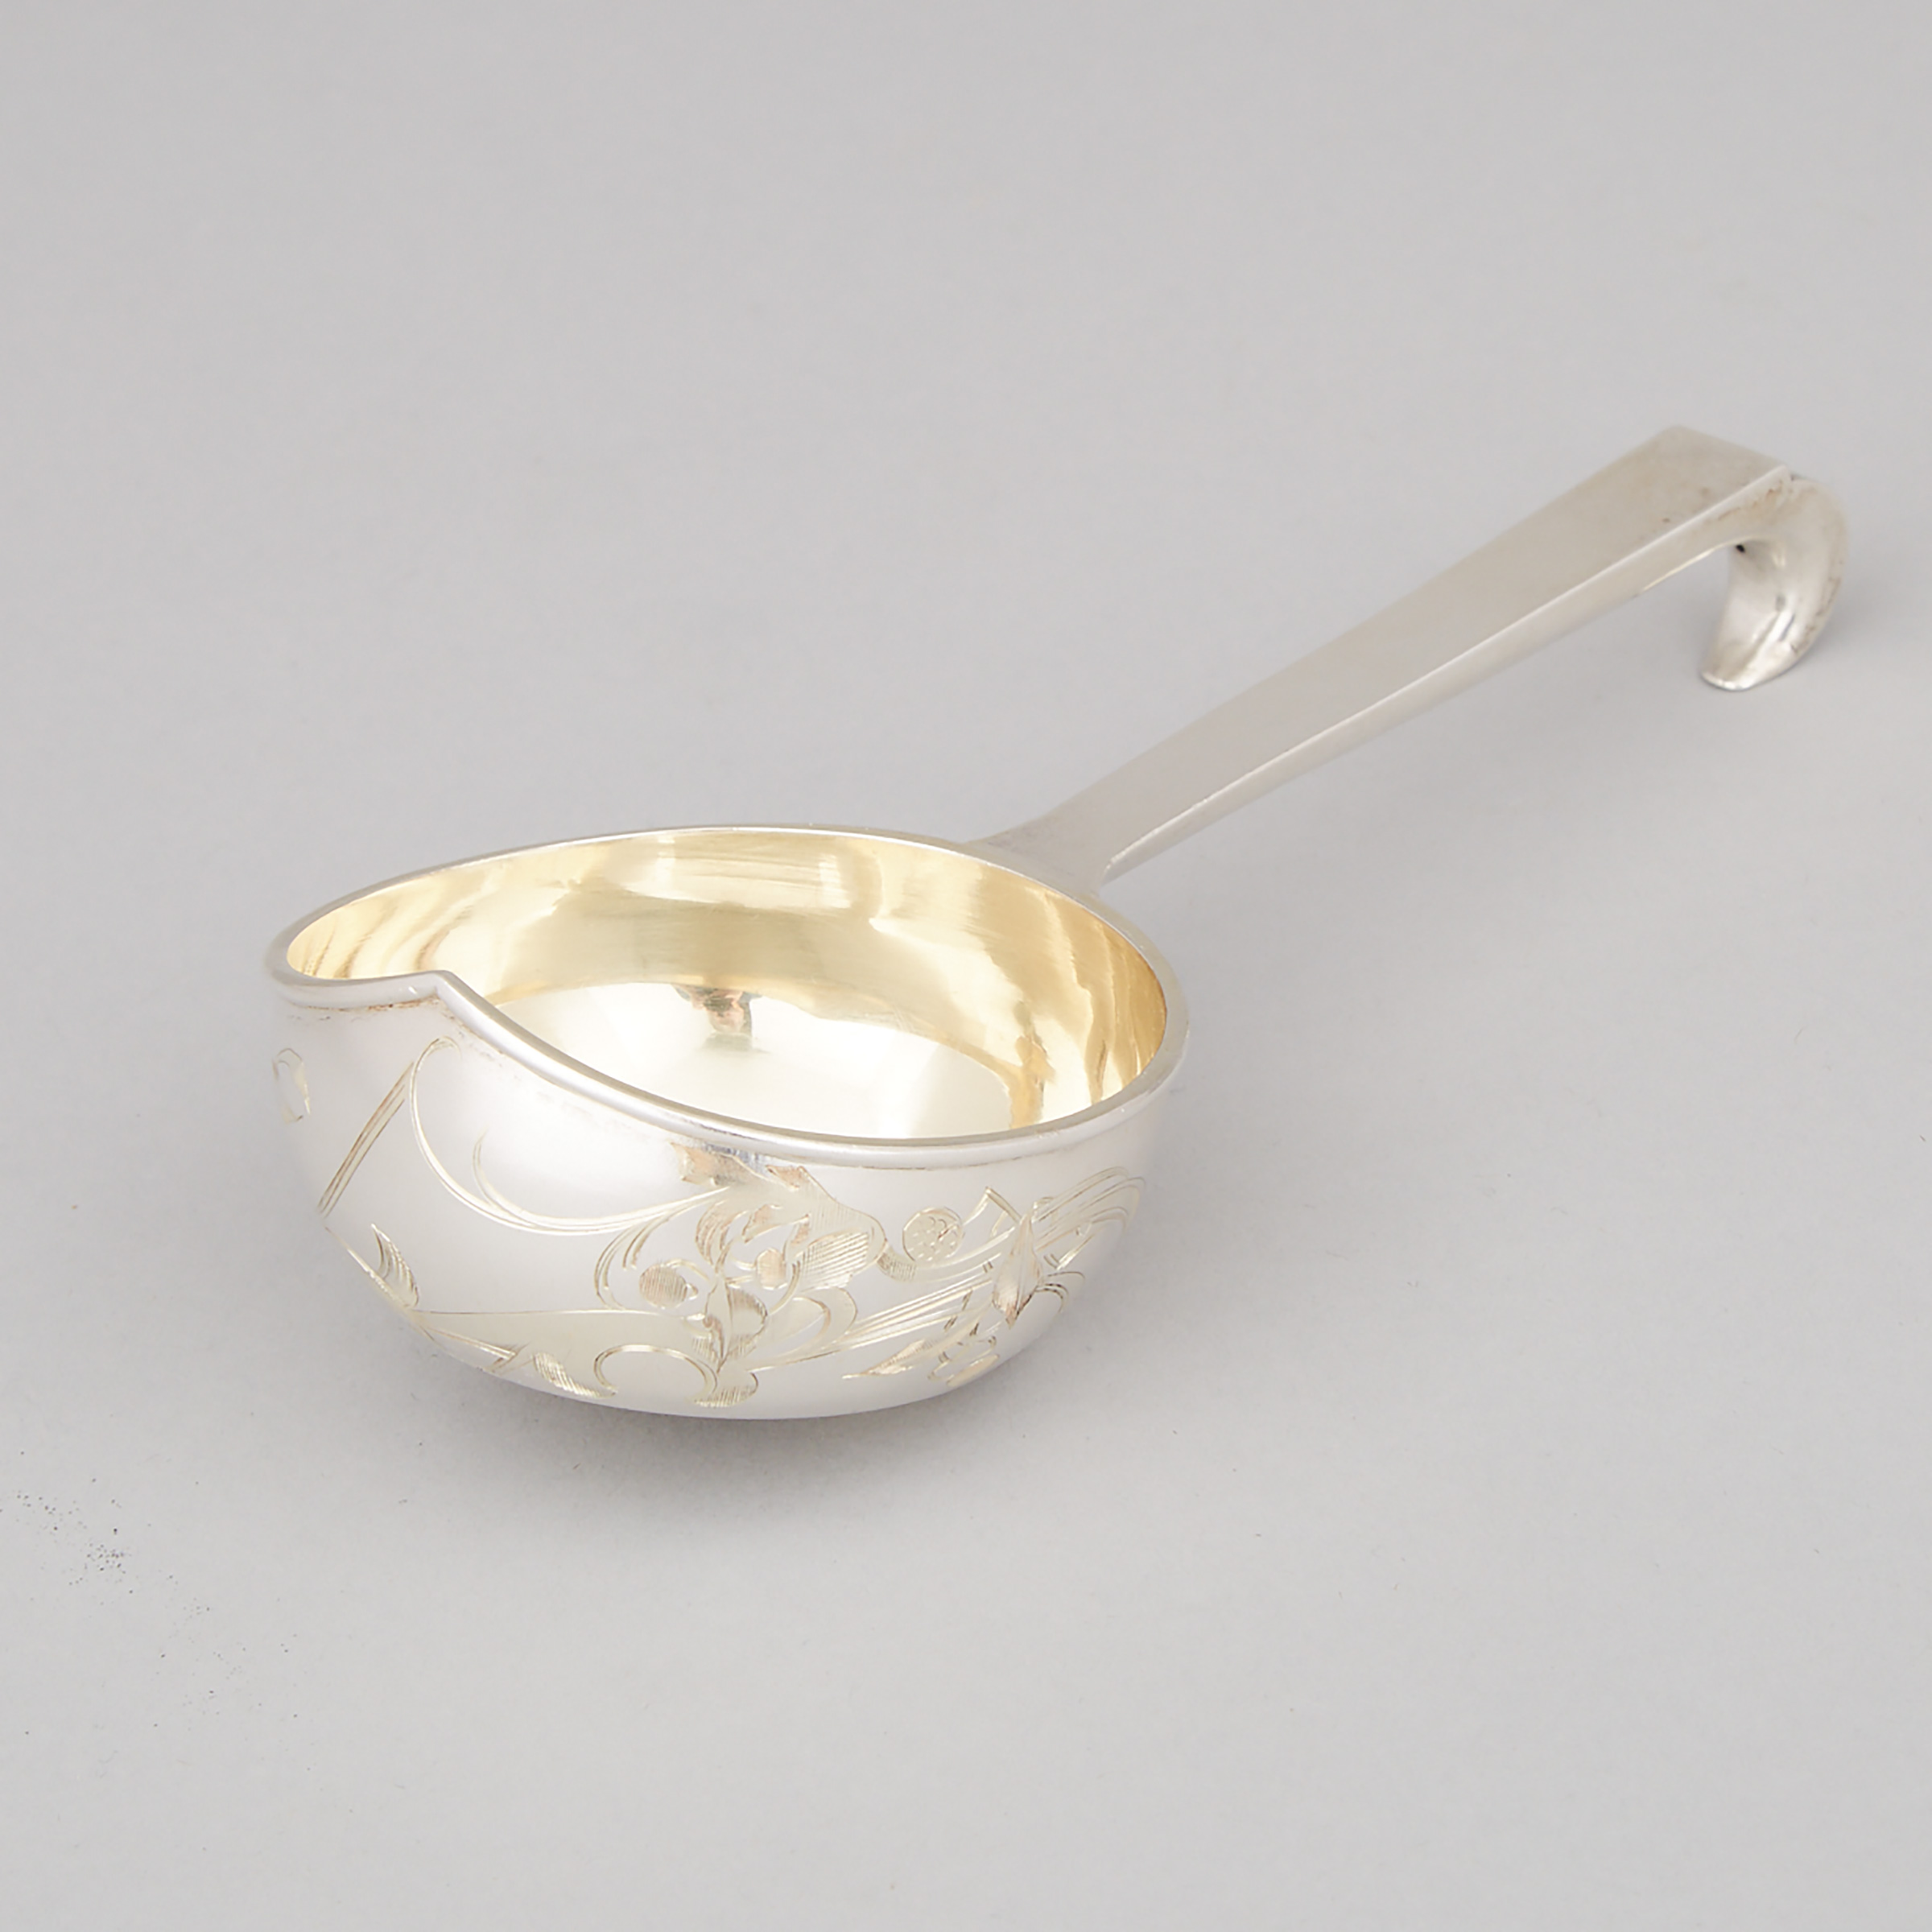 Russian Silver Ladle, Moscow, c.1899-1908